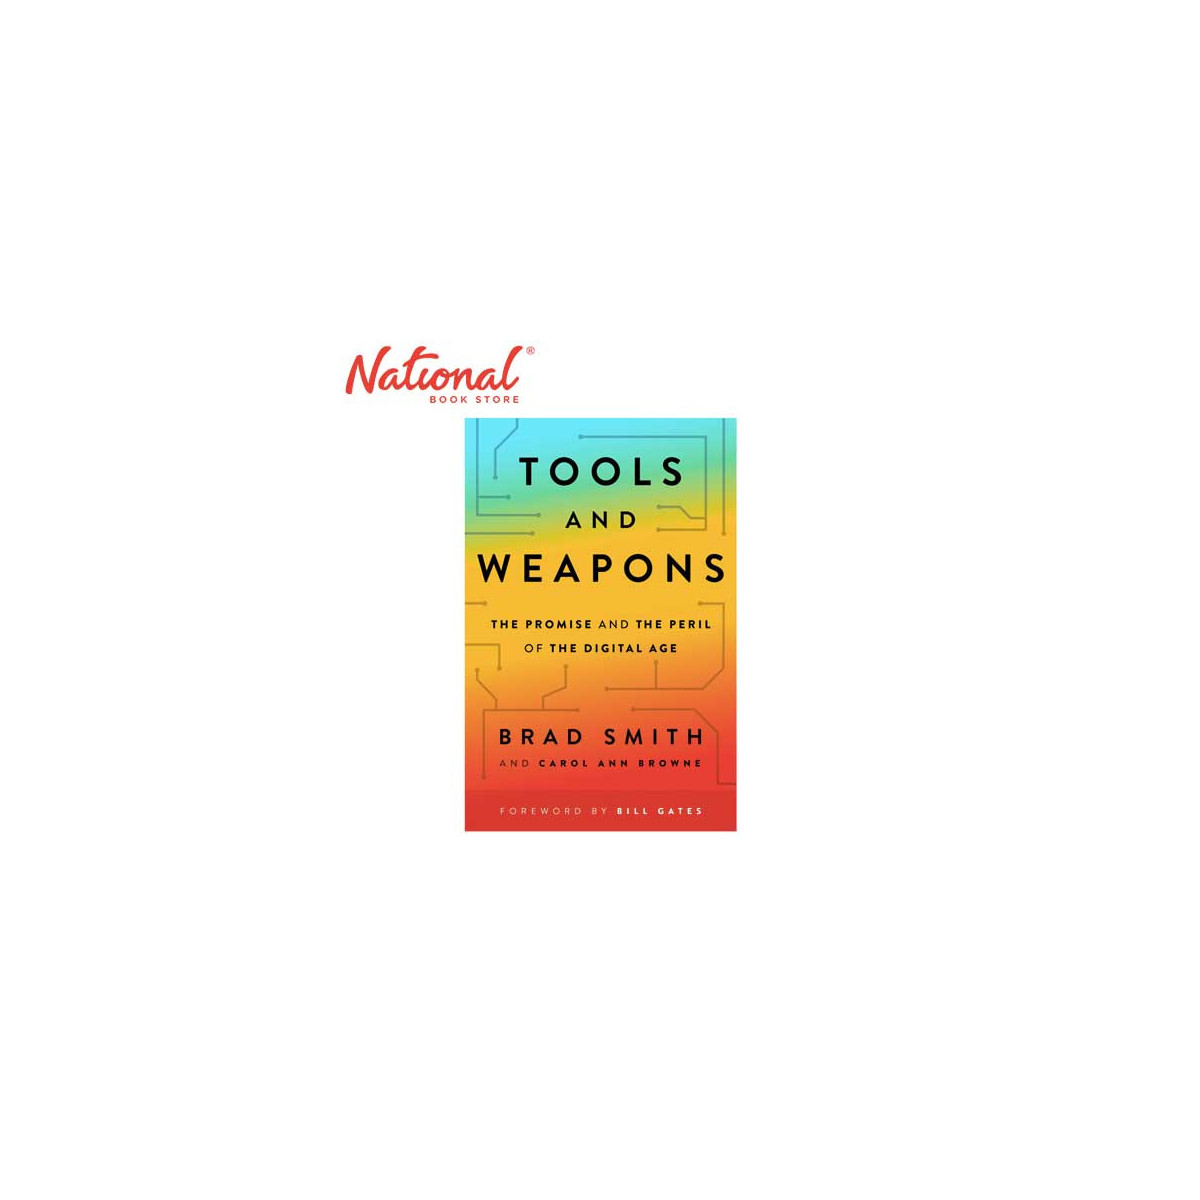 Tools and Weapons by Brad Smith - Hardcover - Management - Leadership Books